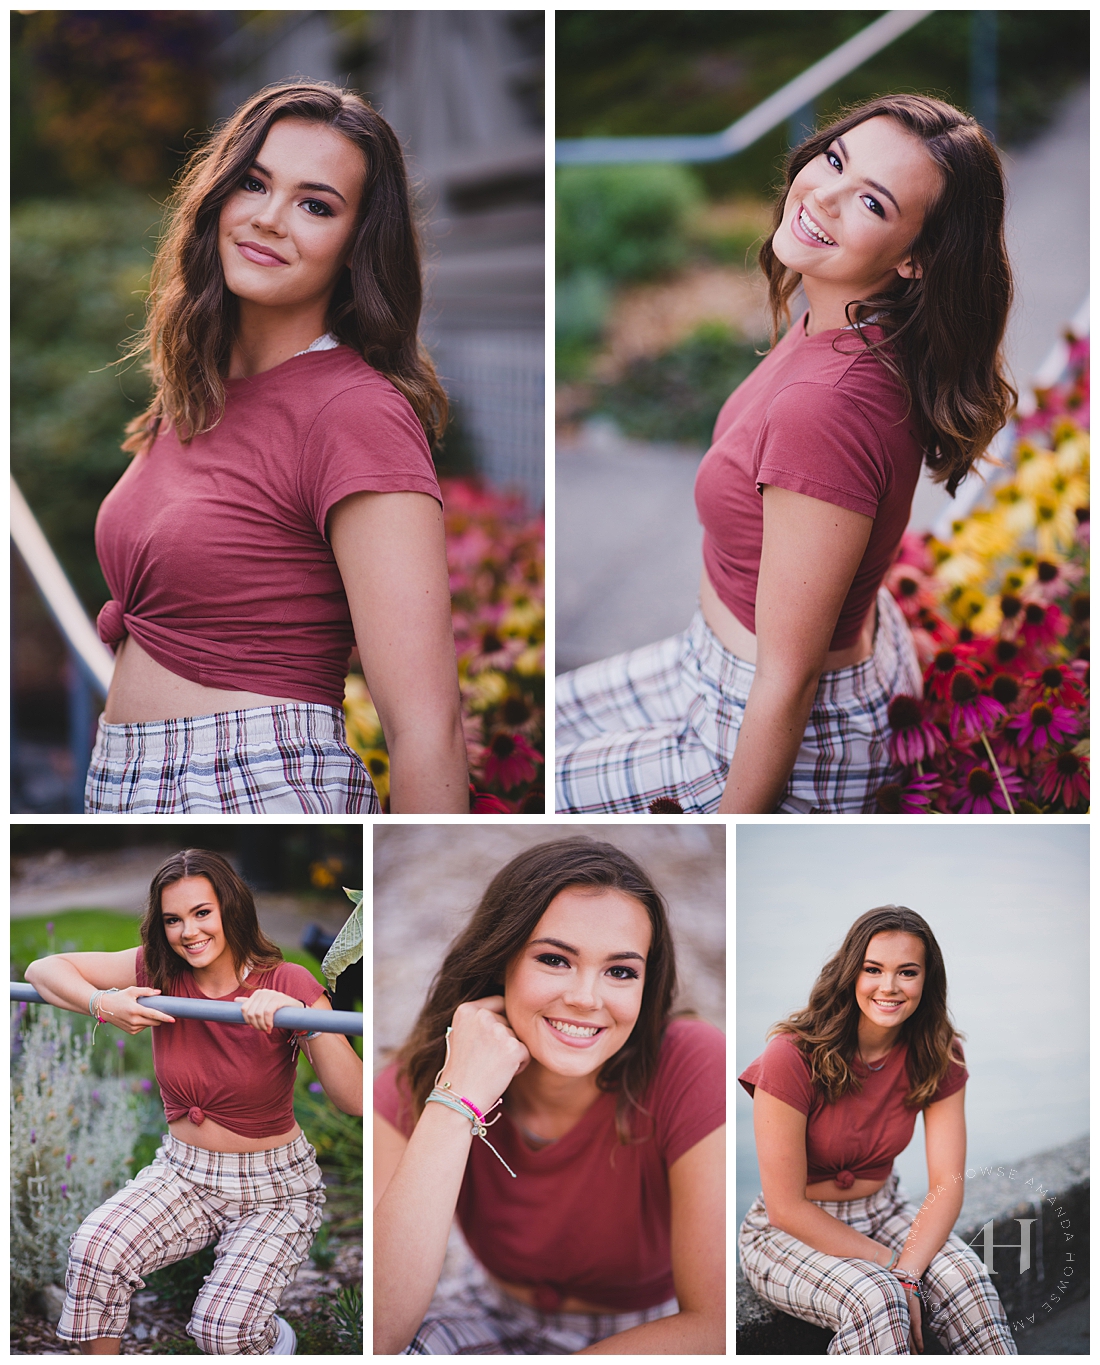 Cute Senior Portraits of High School Girl on the Beach | Crop Top and Plaid Pants, Outfit Ideas for Senior Girls, Poses for Seniors | Photographed by Tacoma Senior Photographer Amanda Howse